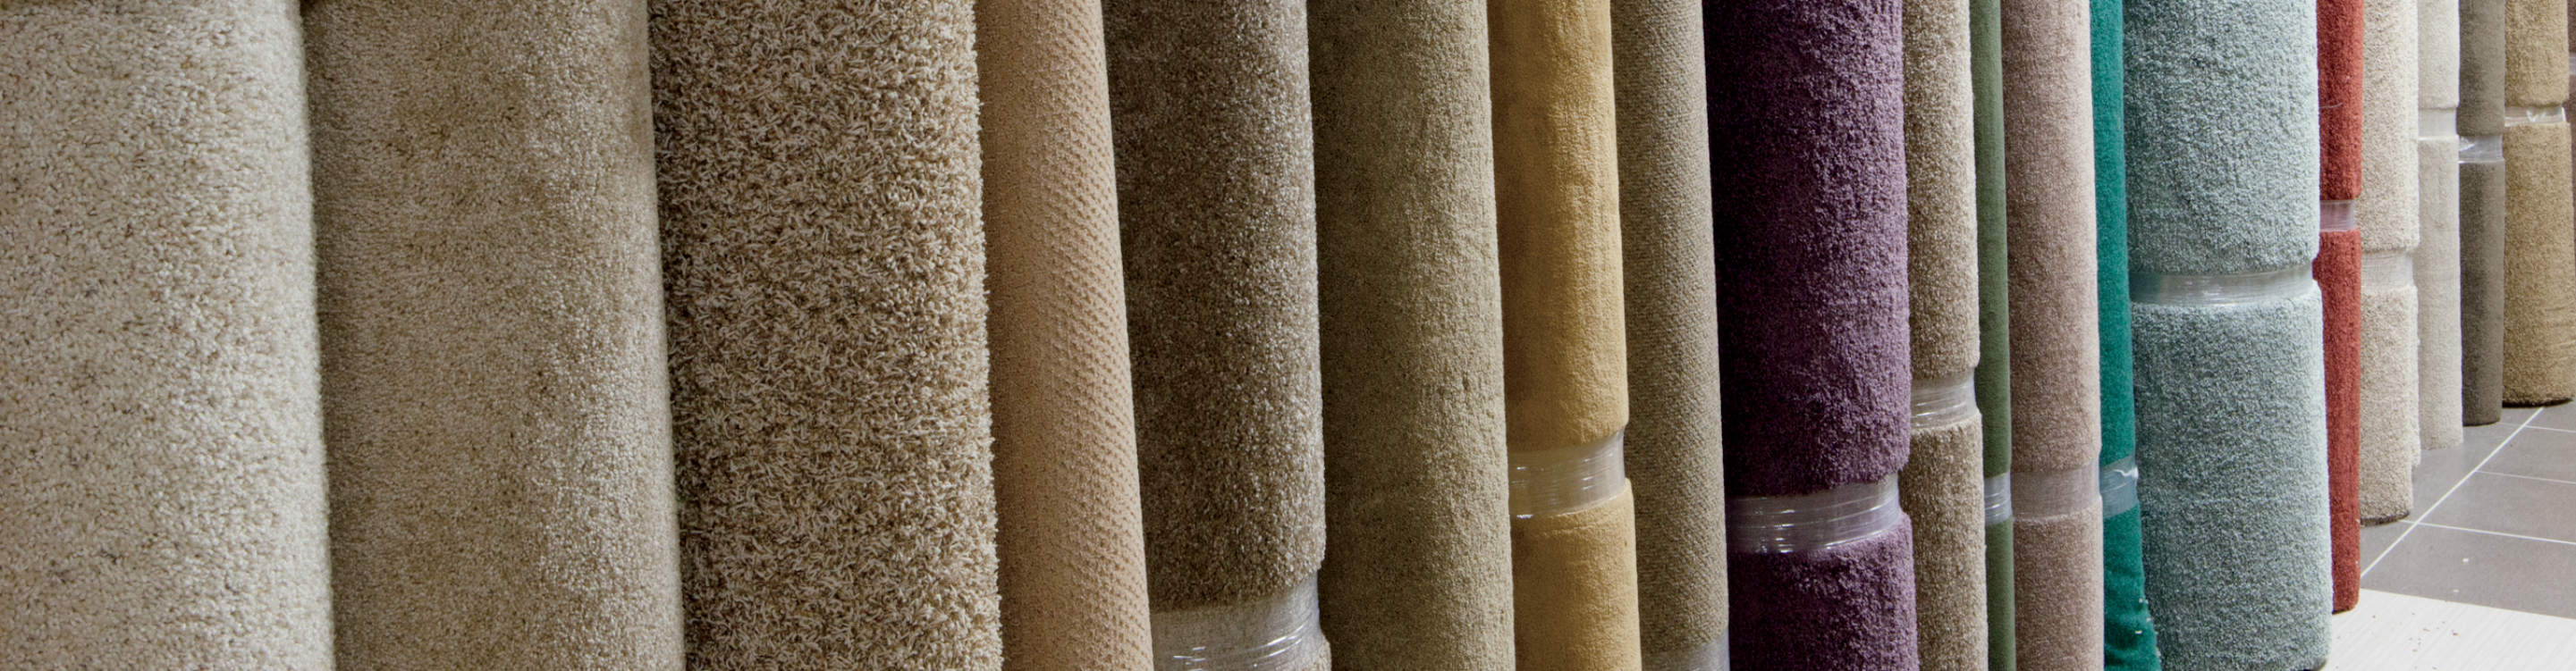 rolled up selection of carpet remnants in different colors